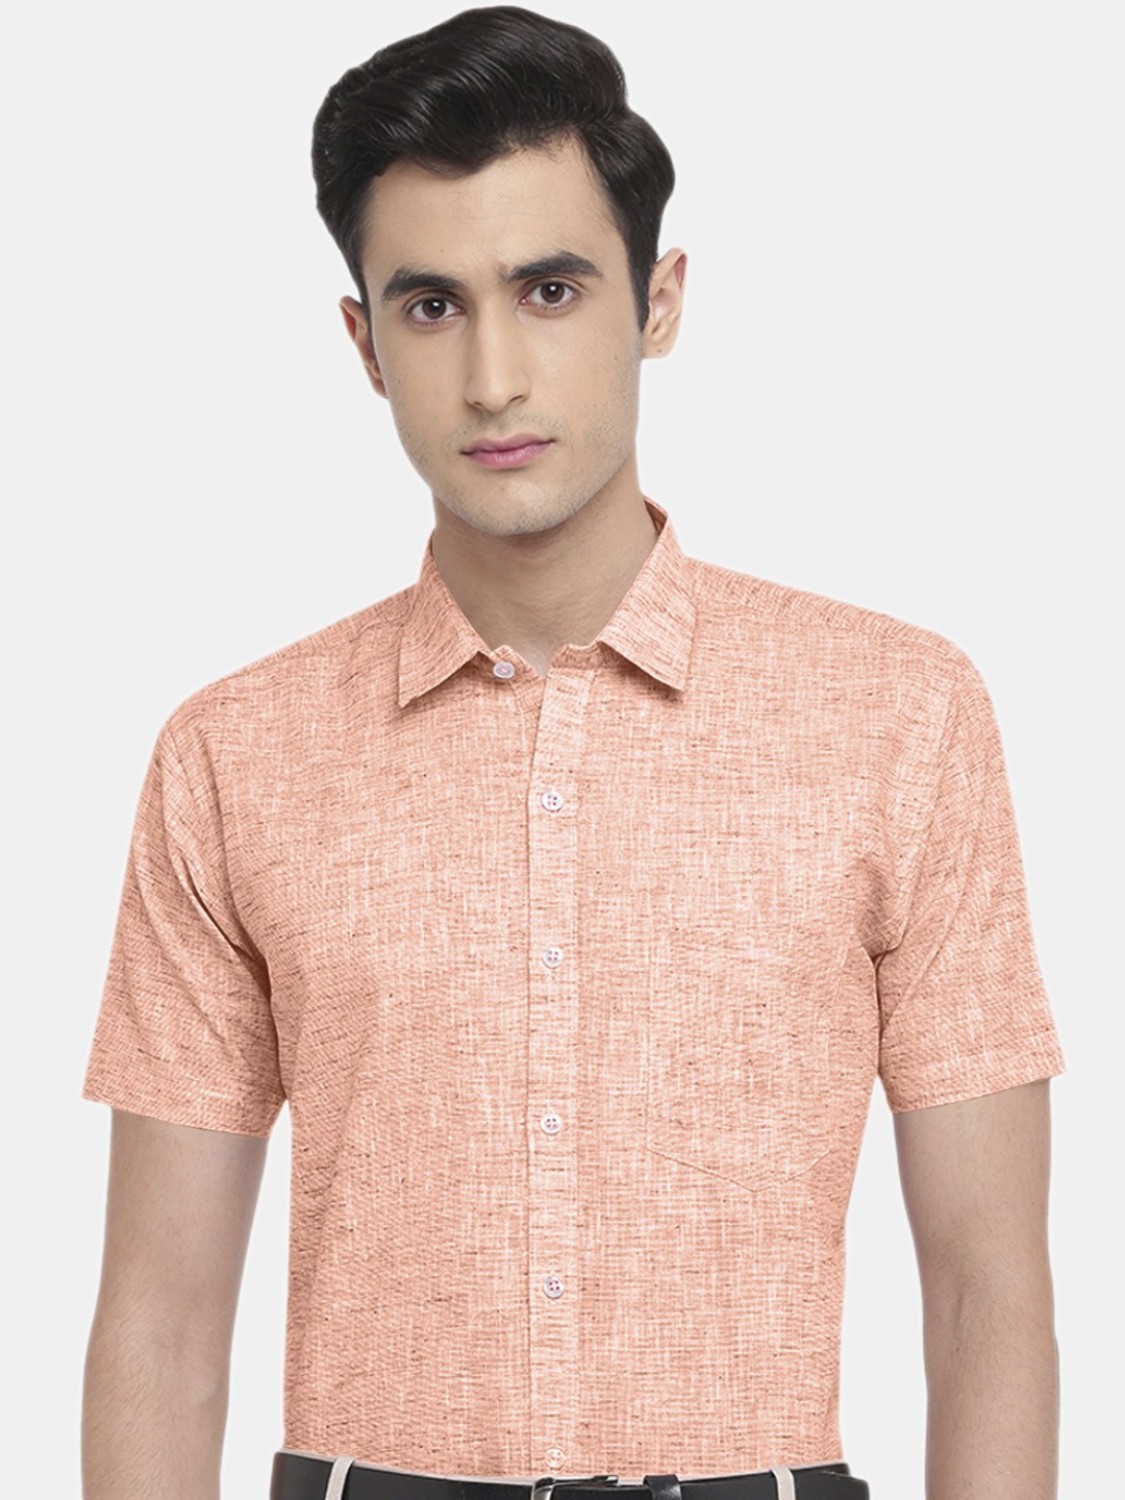 Opruiming Blue Solid Casual Shirt, 46% OFF